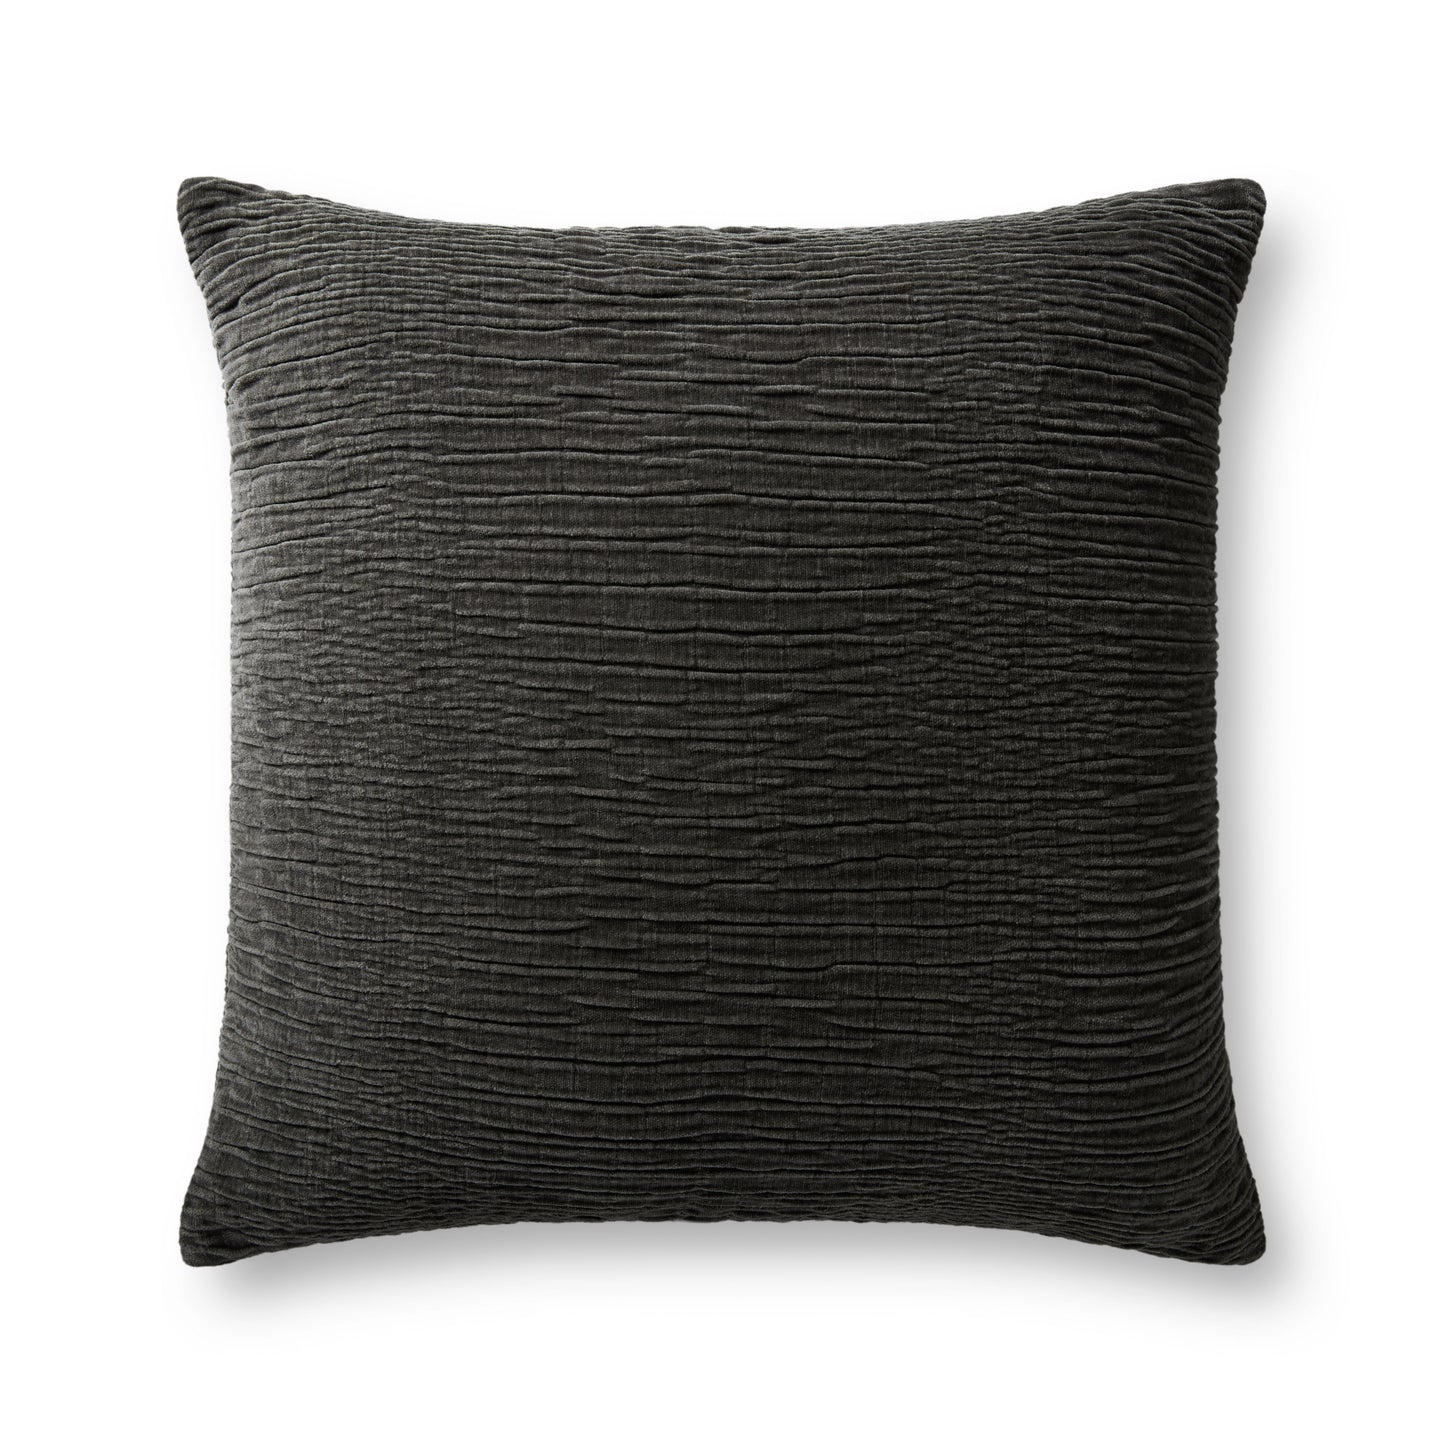 Photo of a pillow;  Charcoal 22'' x 22'' Cover w/Poly Pillow